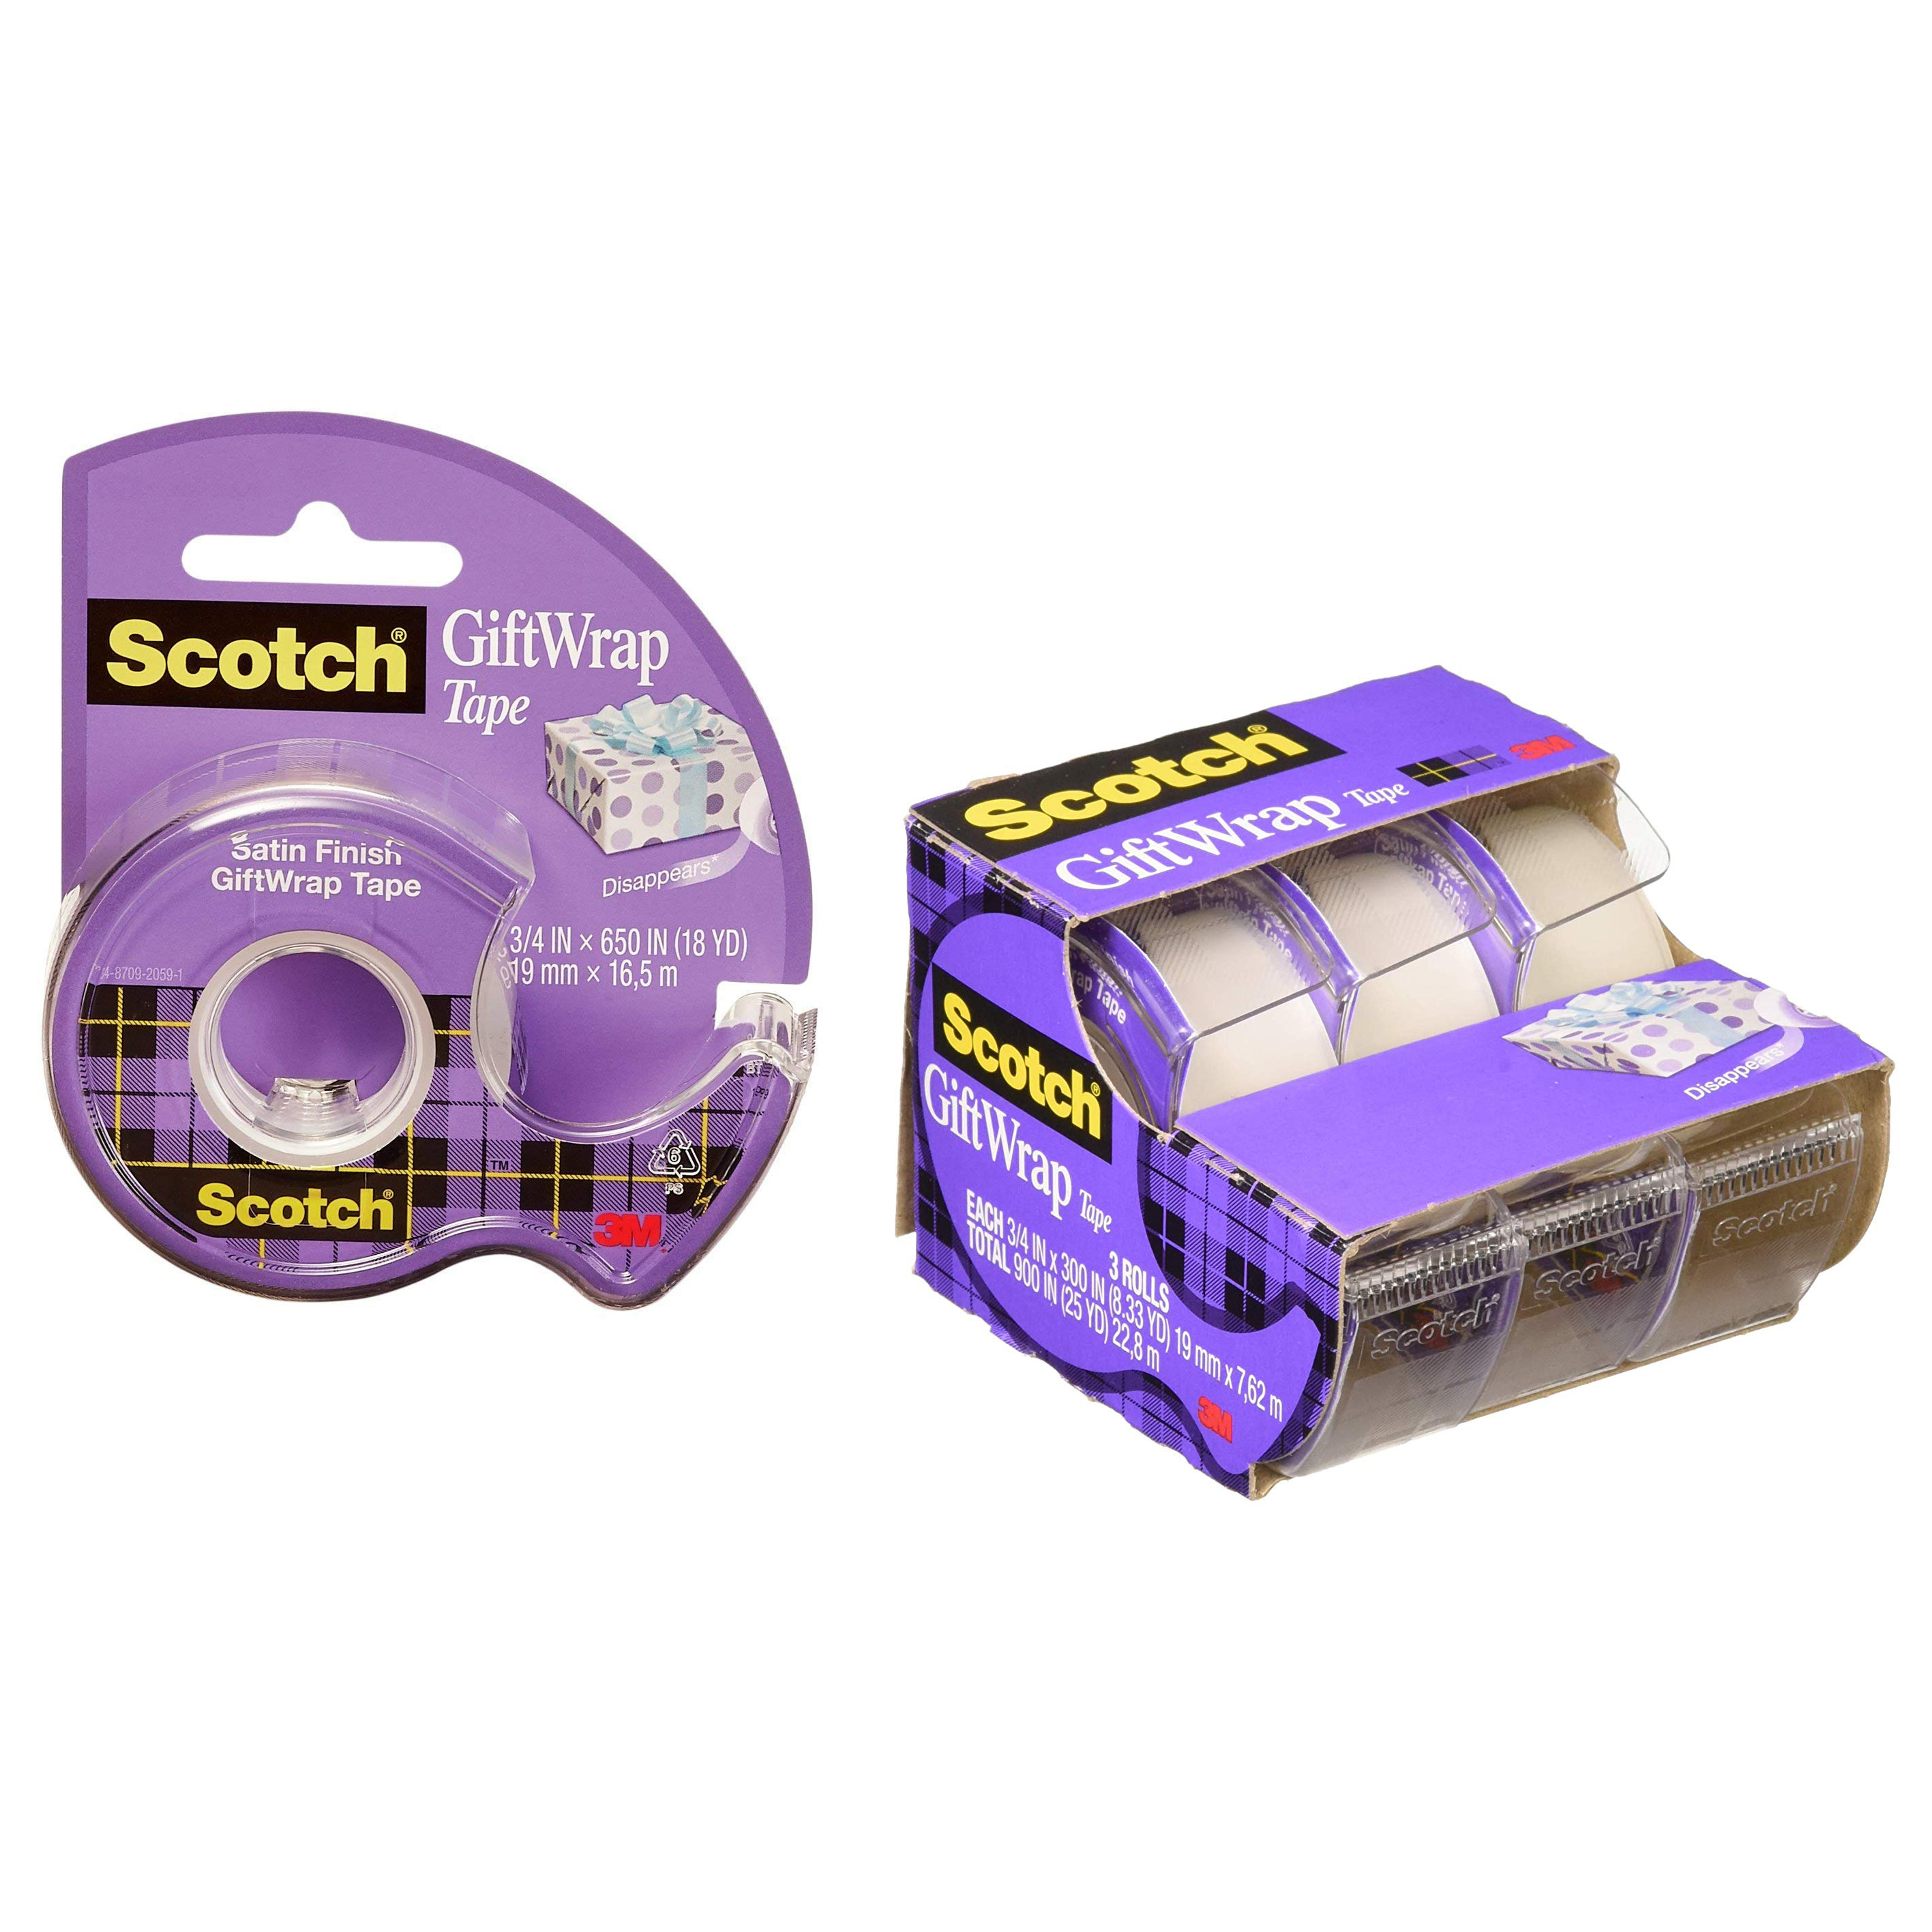 3/4" x 650" Brand New Three Packages of Scotch 3M Satin Finish Gift Wrap Tape 